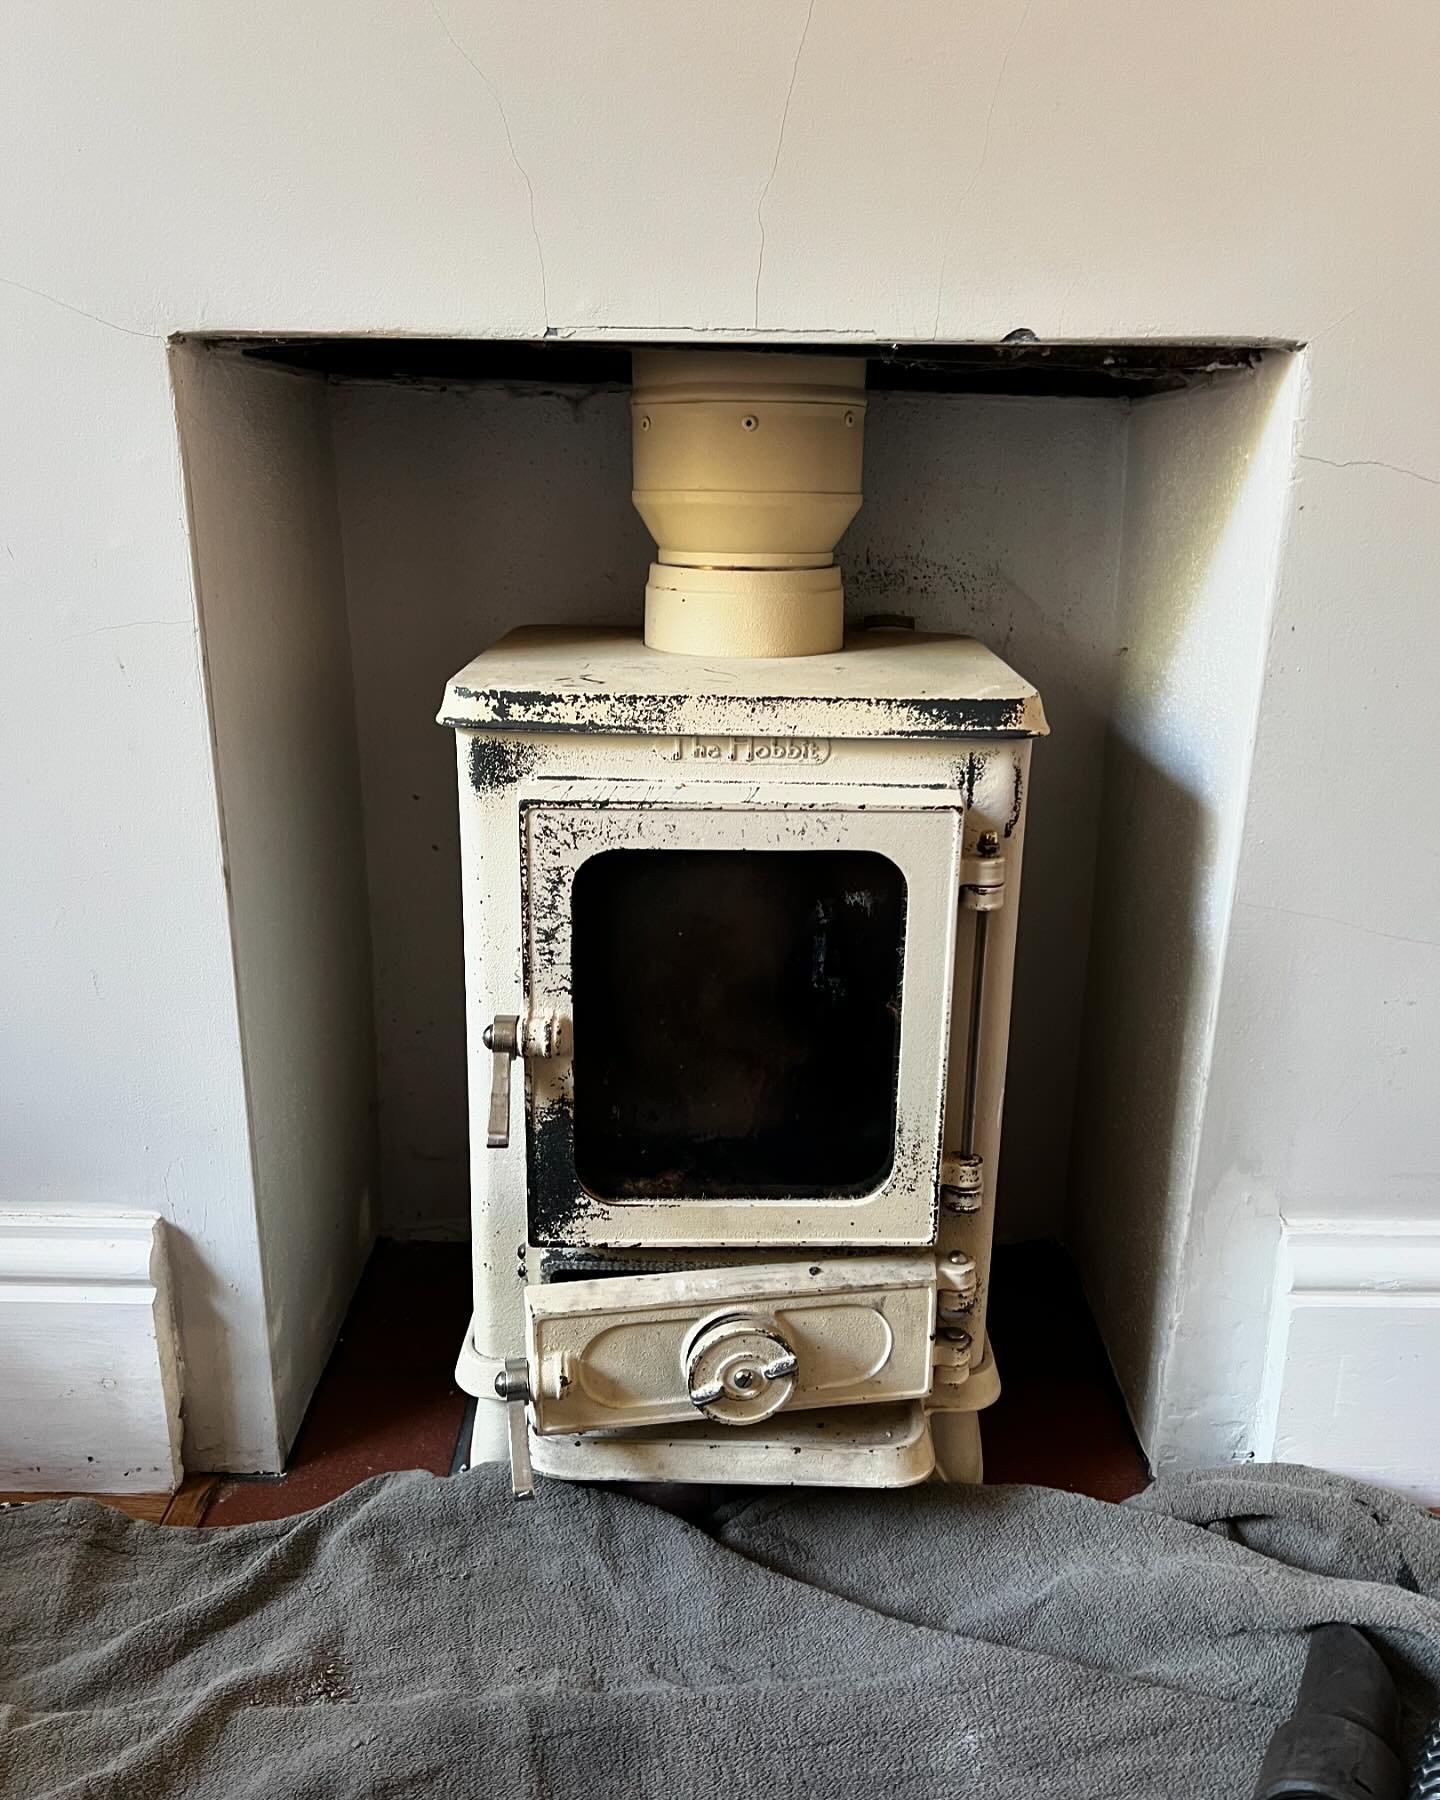 Saturday shift starts with this lovely little @salamanderstoves hobbit 

A stove known for being small but mighty. 

With great looks and being able to have your own stove in multiple colours they really our unique and individual. 

And don&rsquo;t w